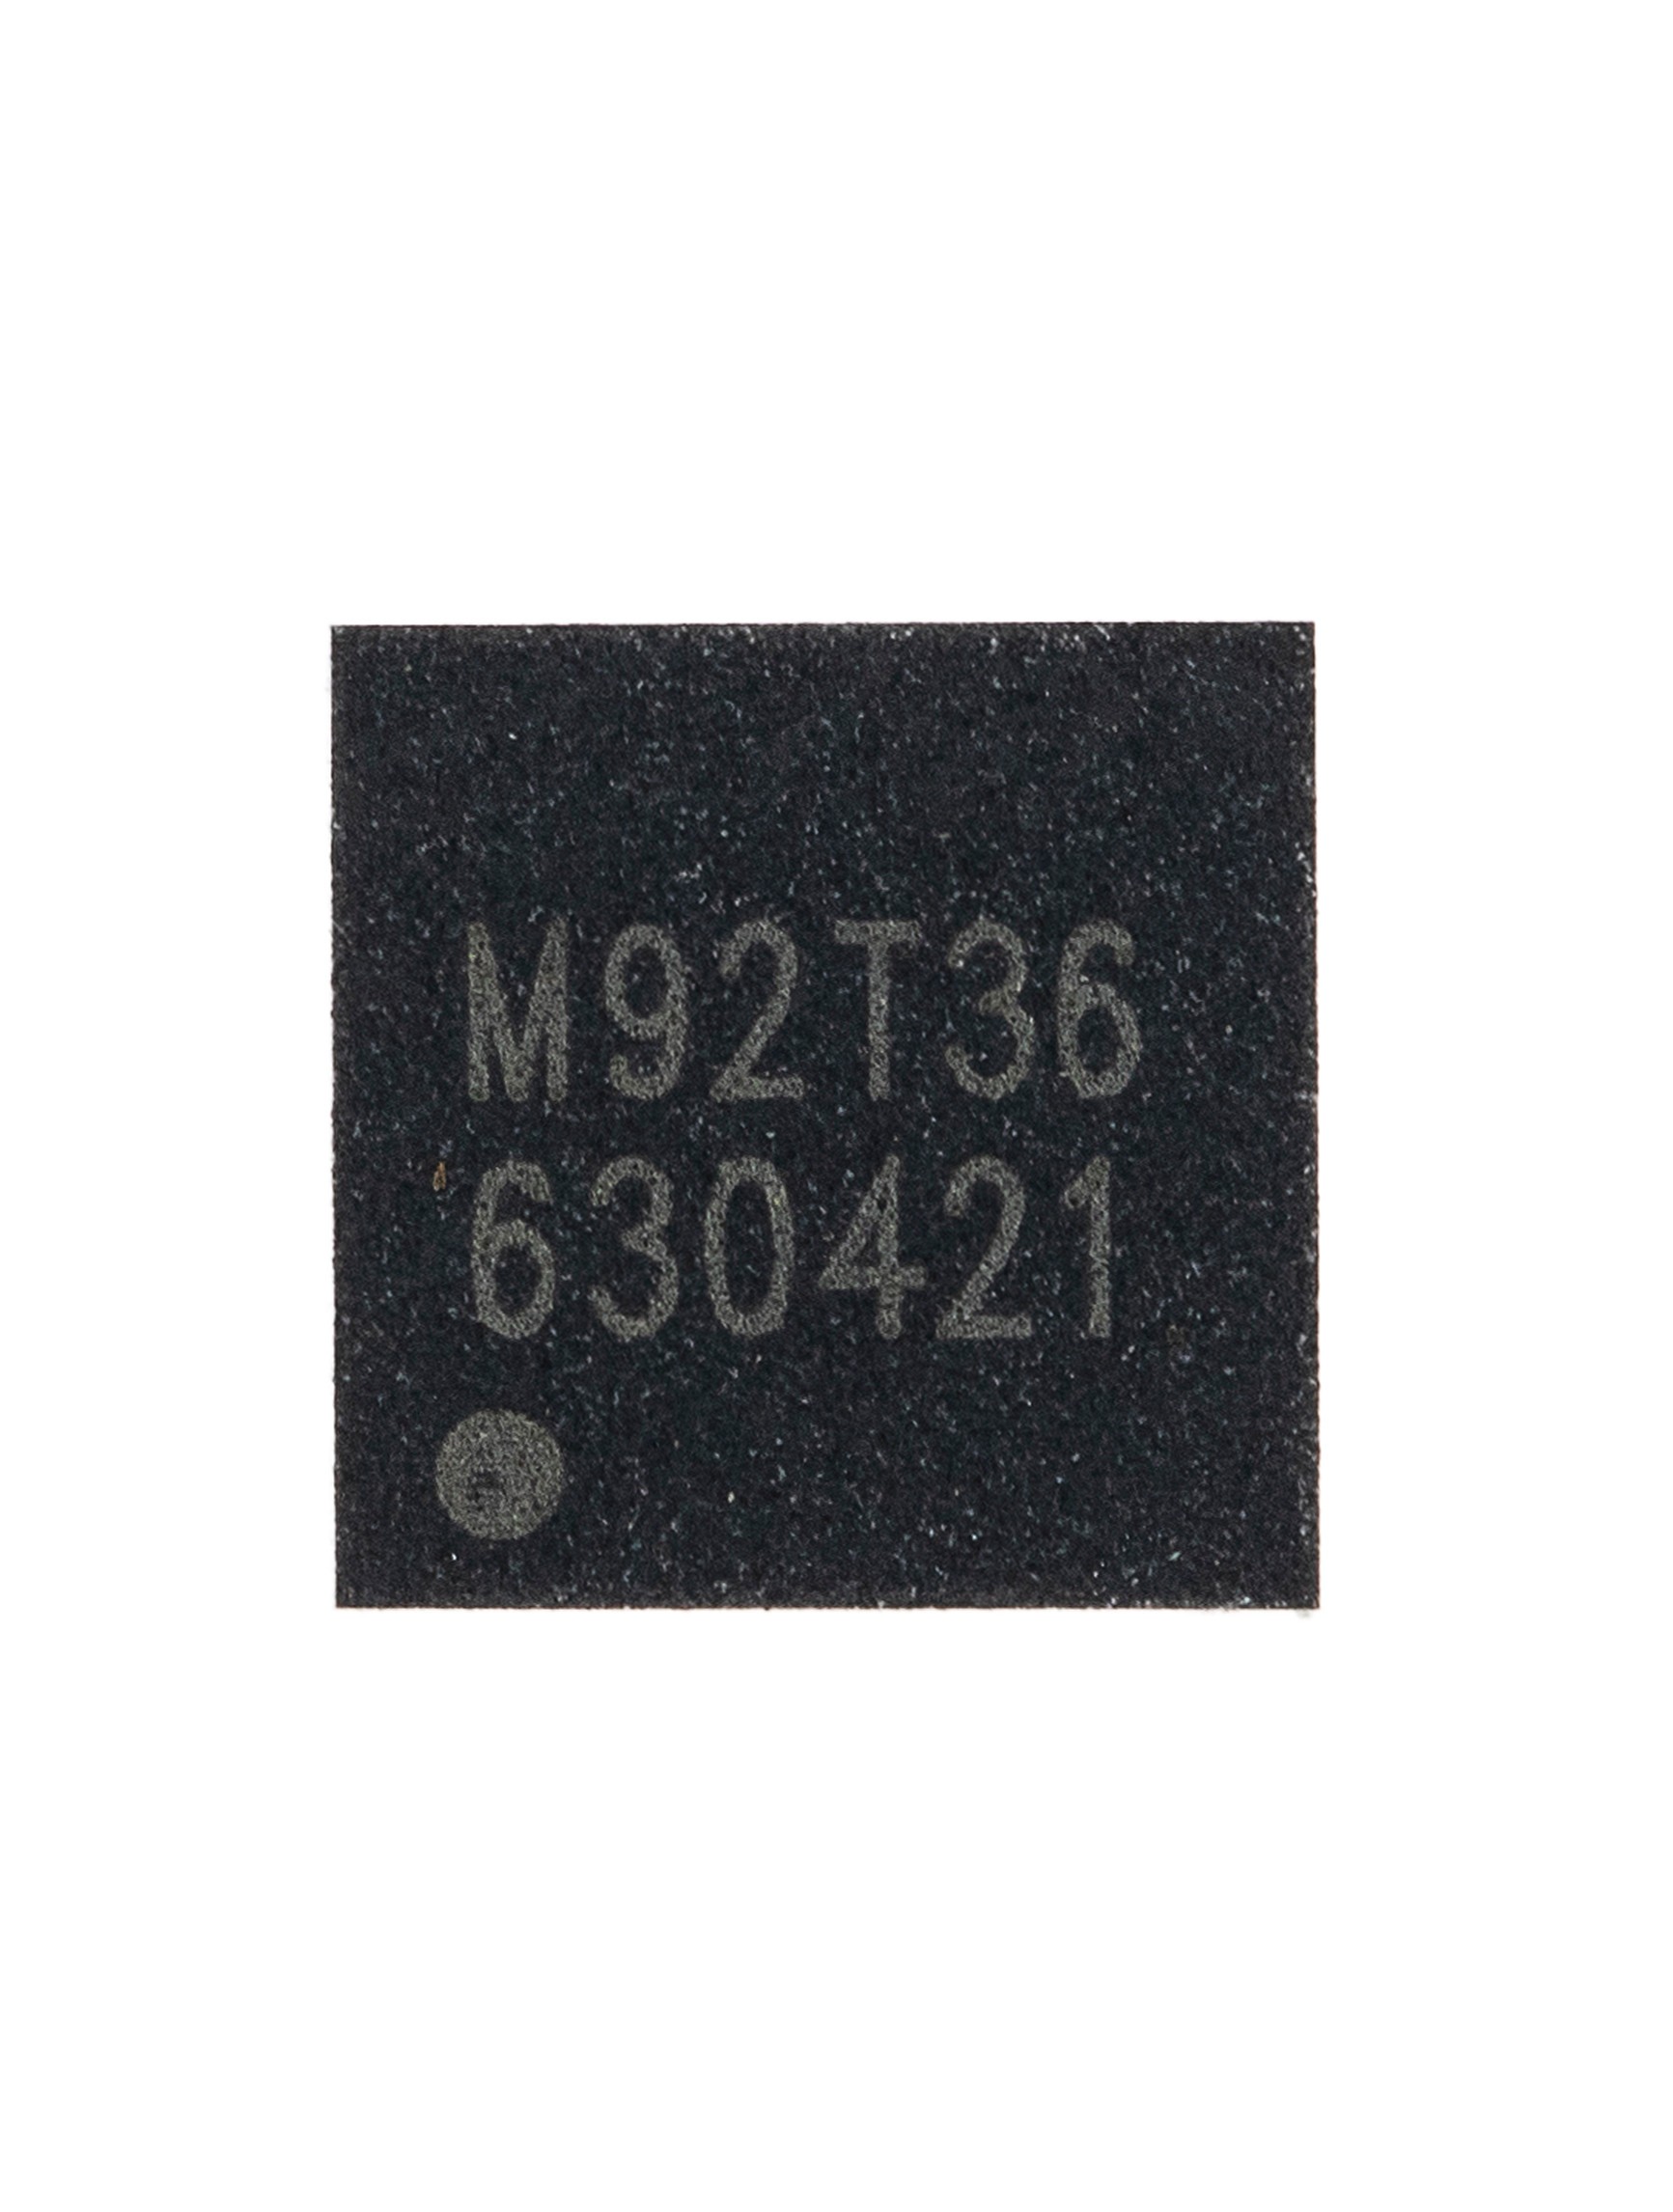 Nintendo Switch Charging Control IC Chip M92T36